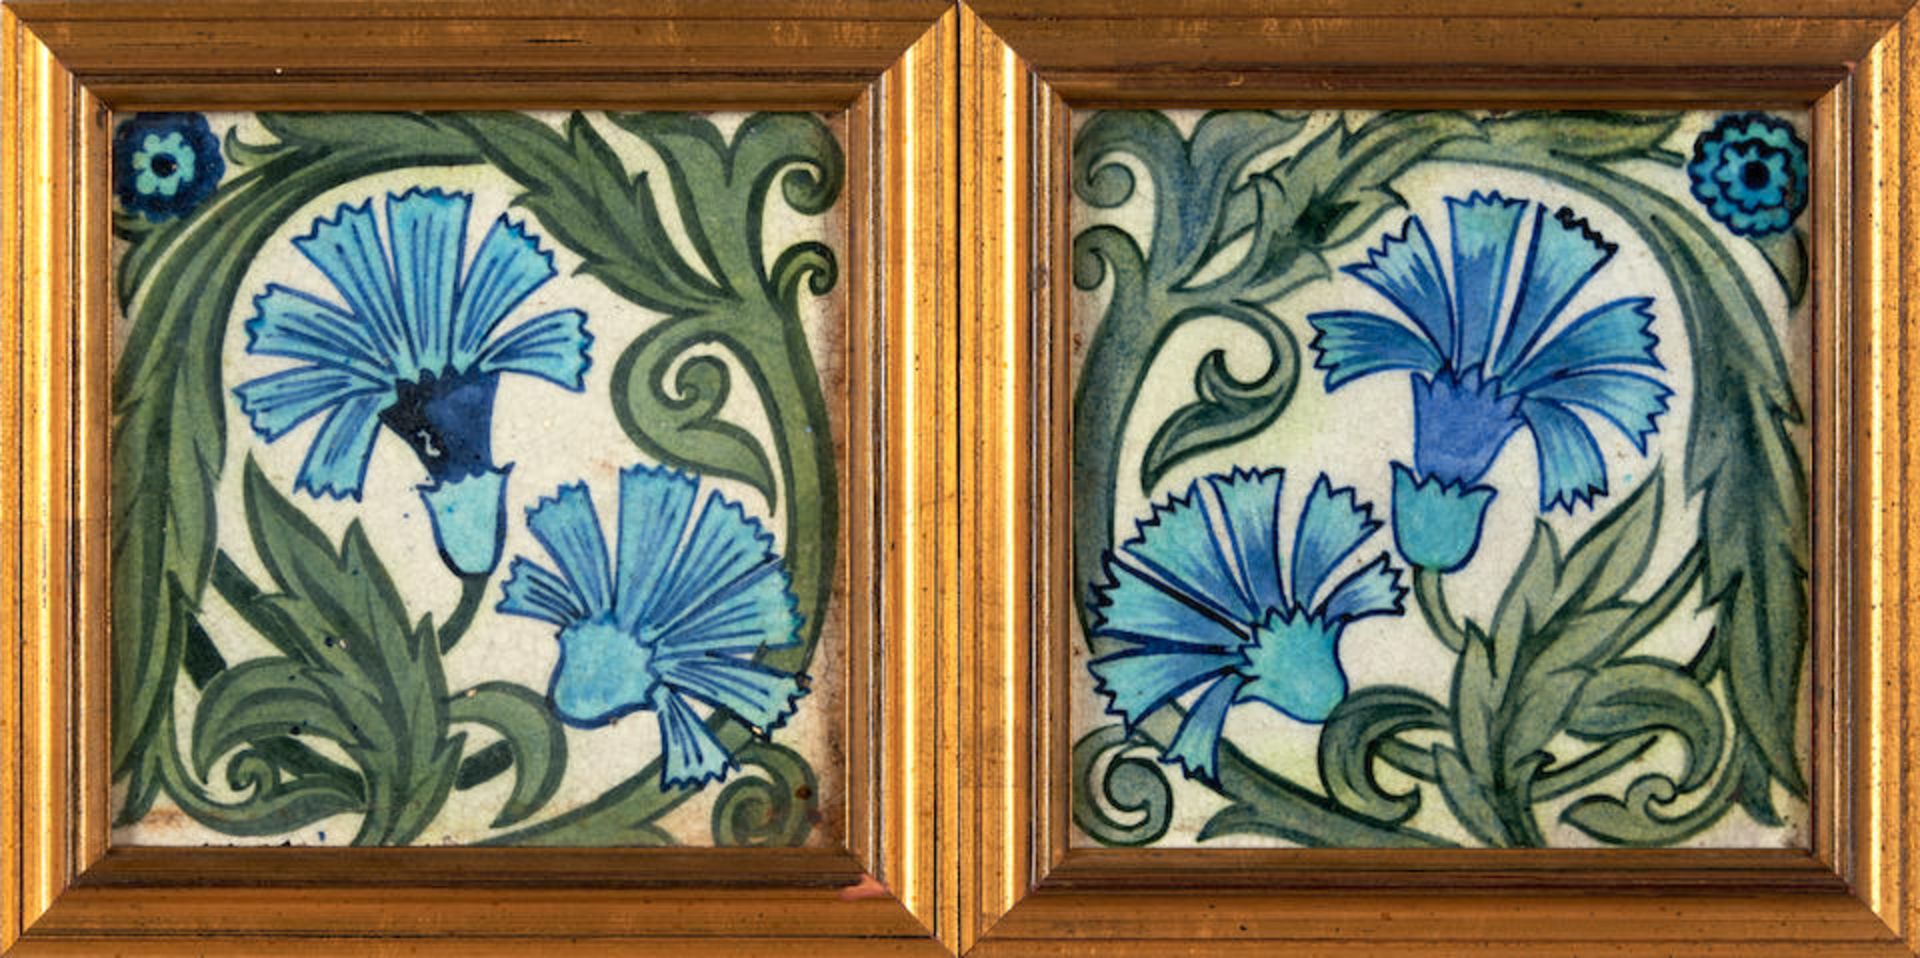 TWO WILLIAM DE MORGAN 'CARNATION' TILES, England, late 19th/early 20th century, on red clay Arch...